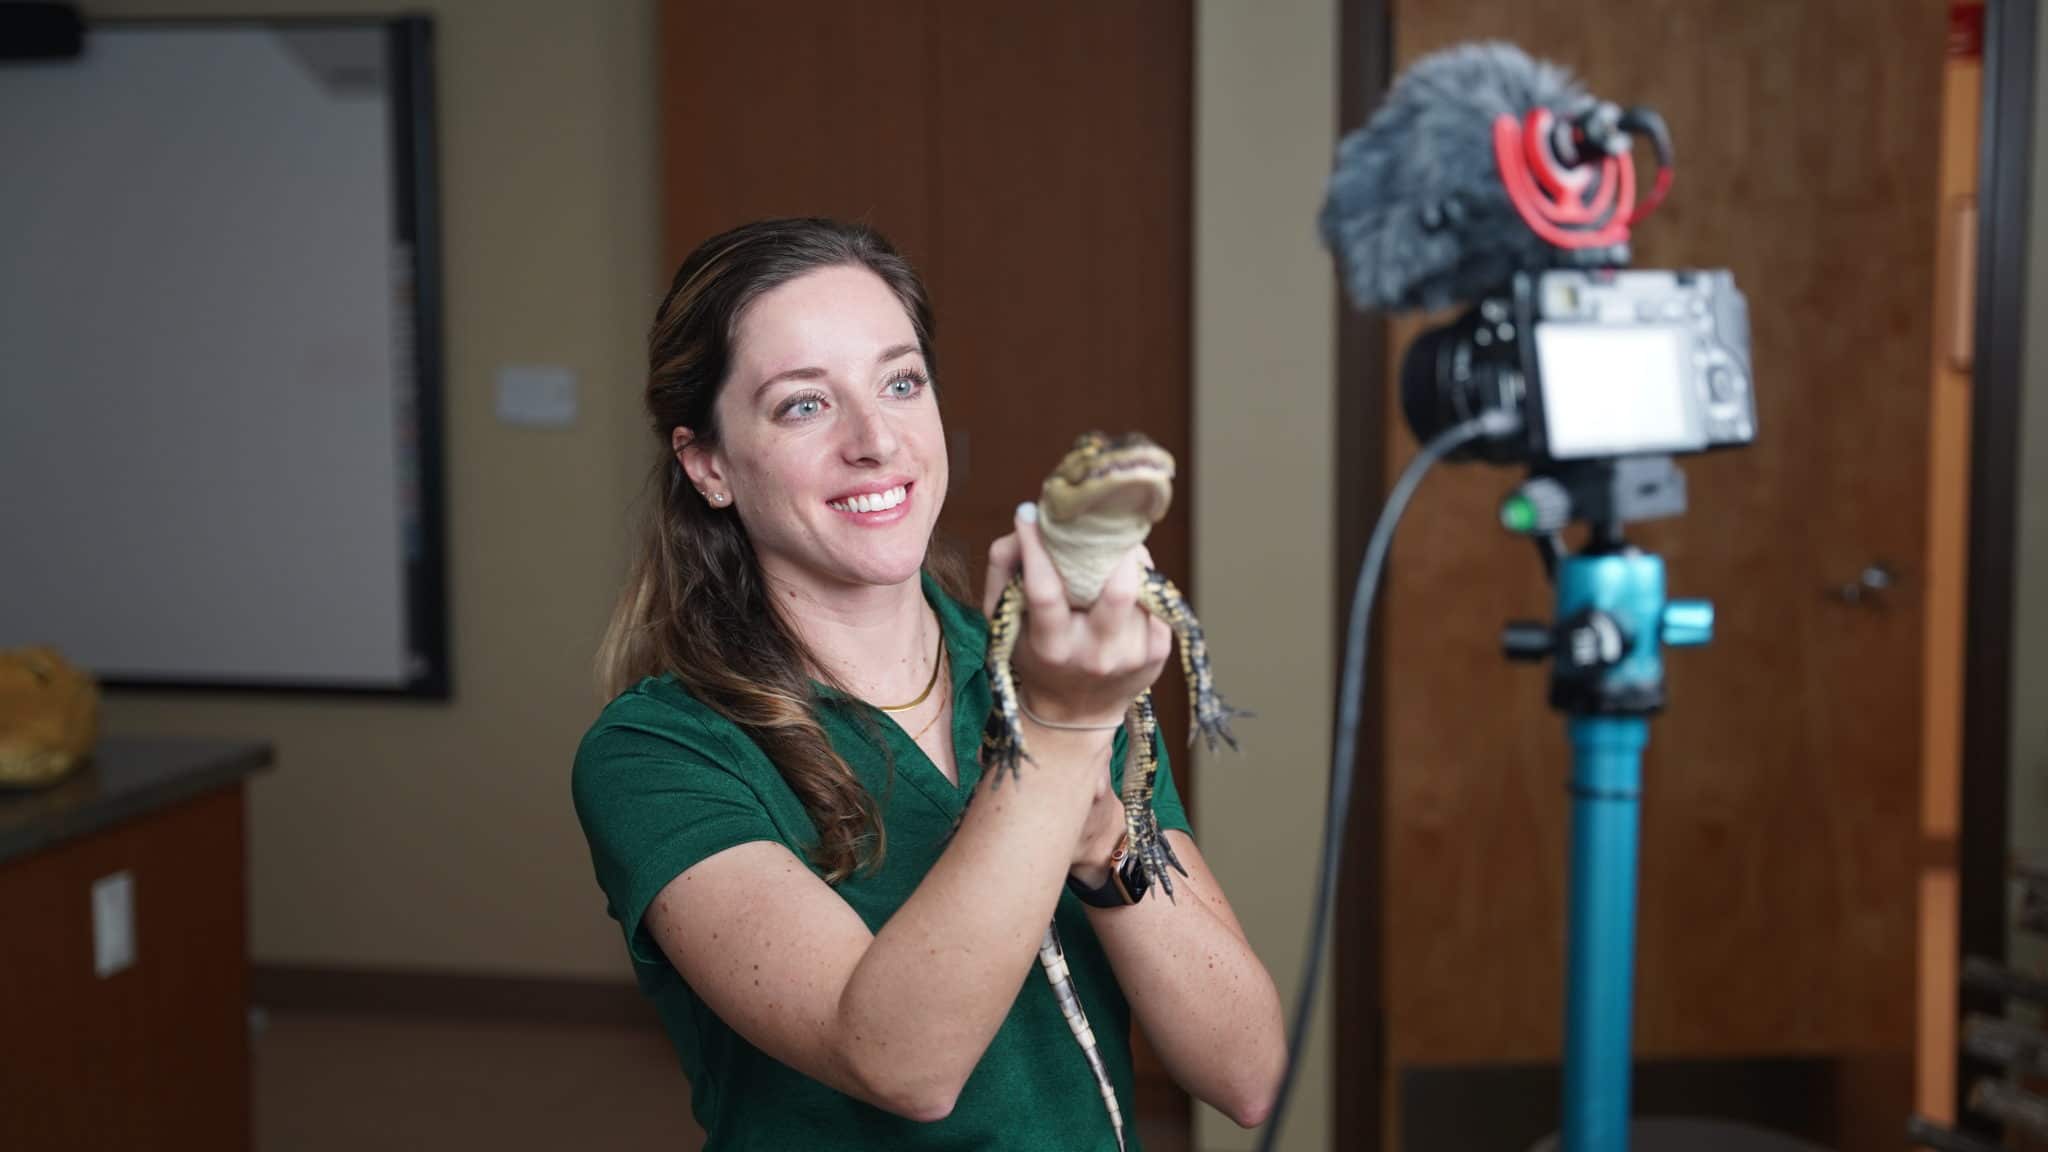 Conservancy educator holding a baby alligator in front of a live streaming camera